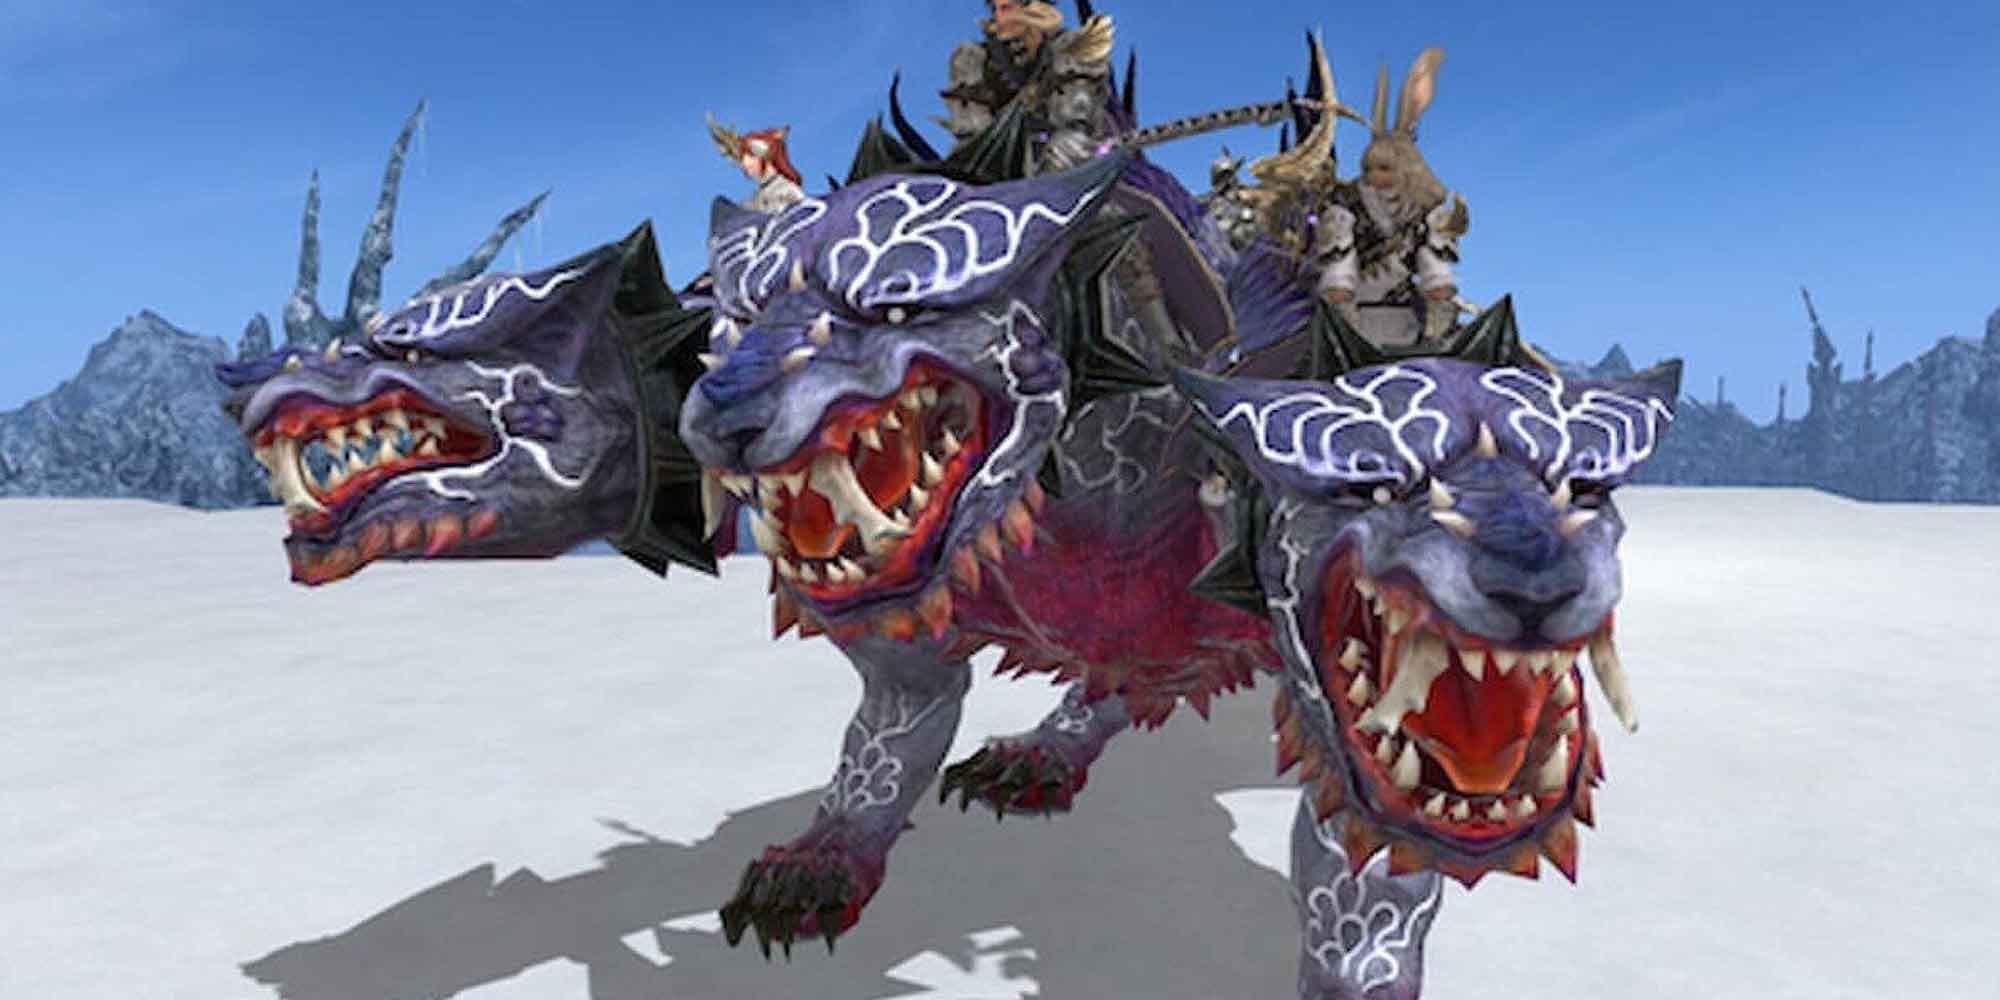 Cerberus is a three-headed canine mount in Final Fantasy 14